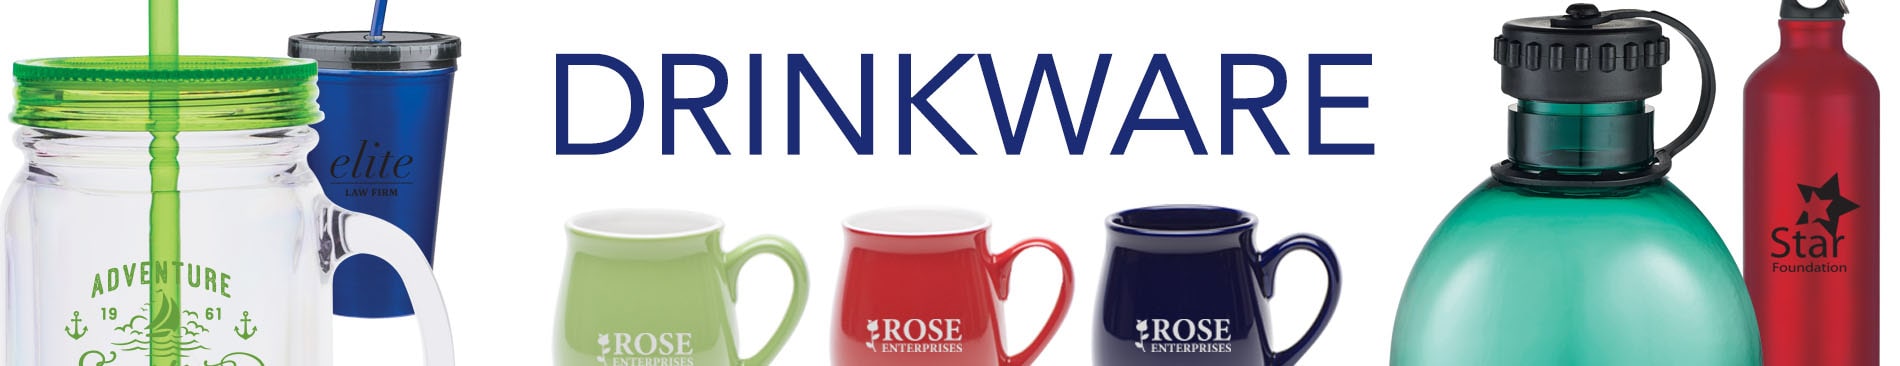 promotional drinkware products